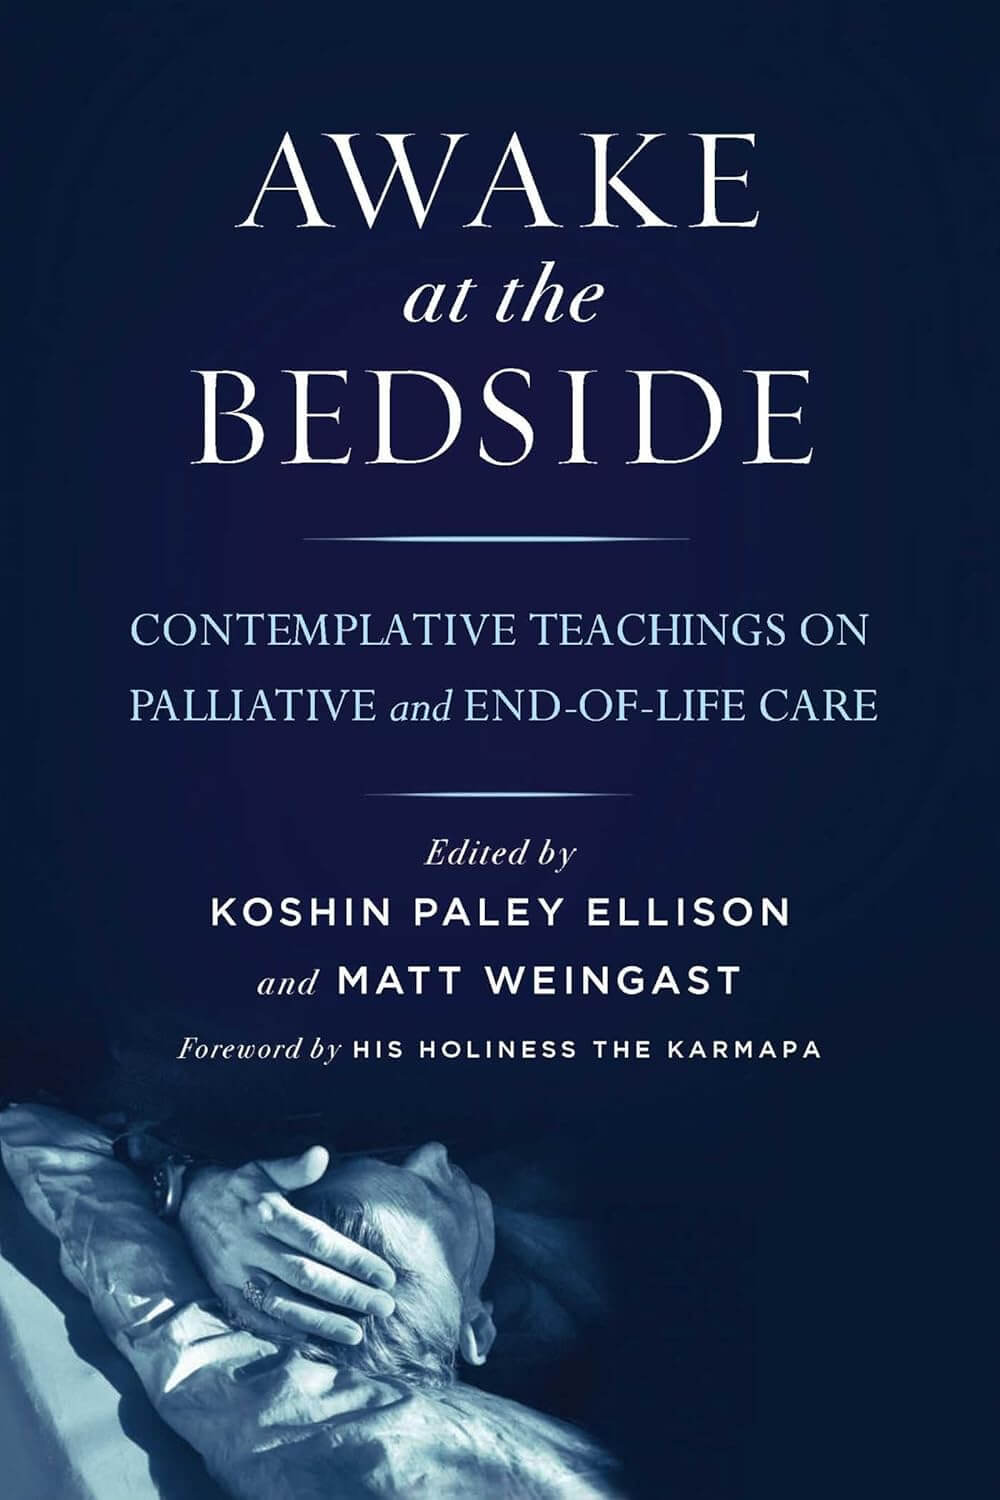 Awake at the Bedside: Contemplative Teachings on Palliative and End of Life Care